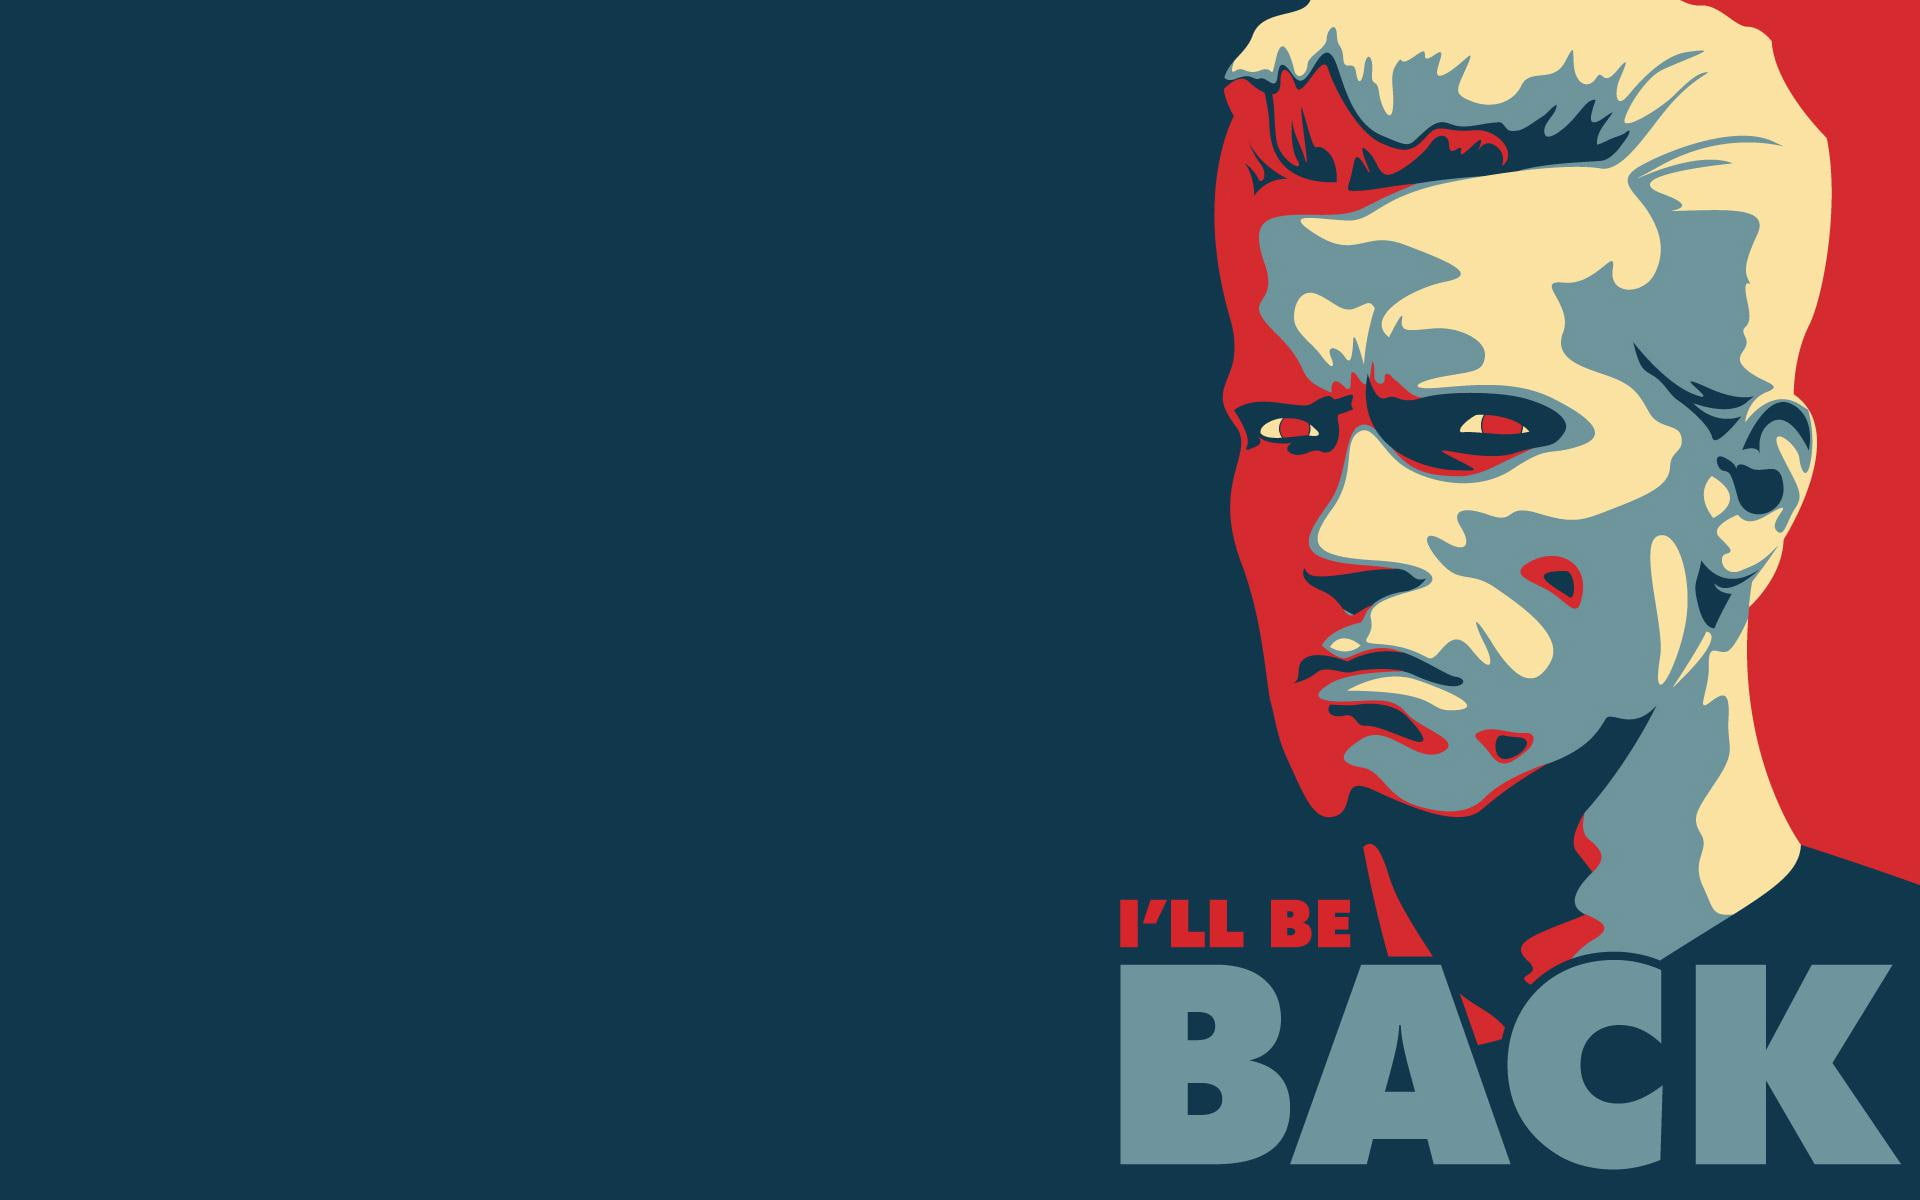 Terminator quote wallpaper, i'll be back illustration, quotes, 1920x1200